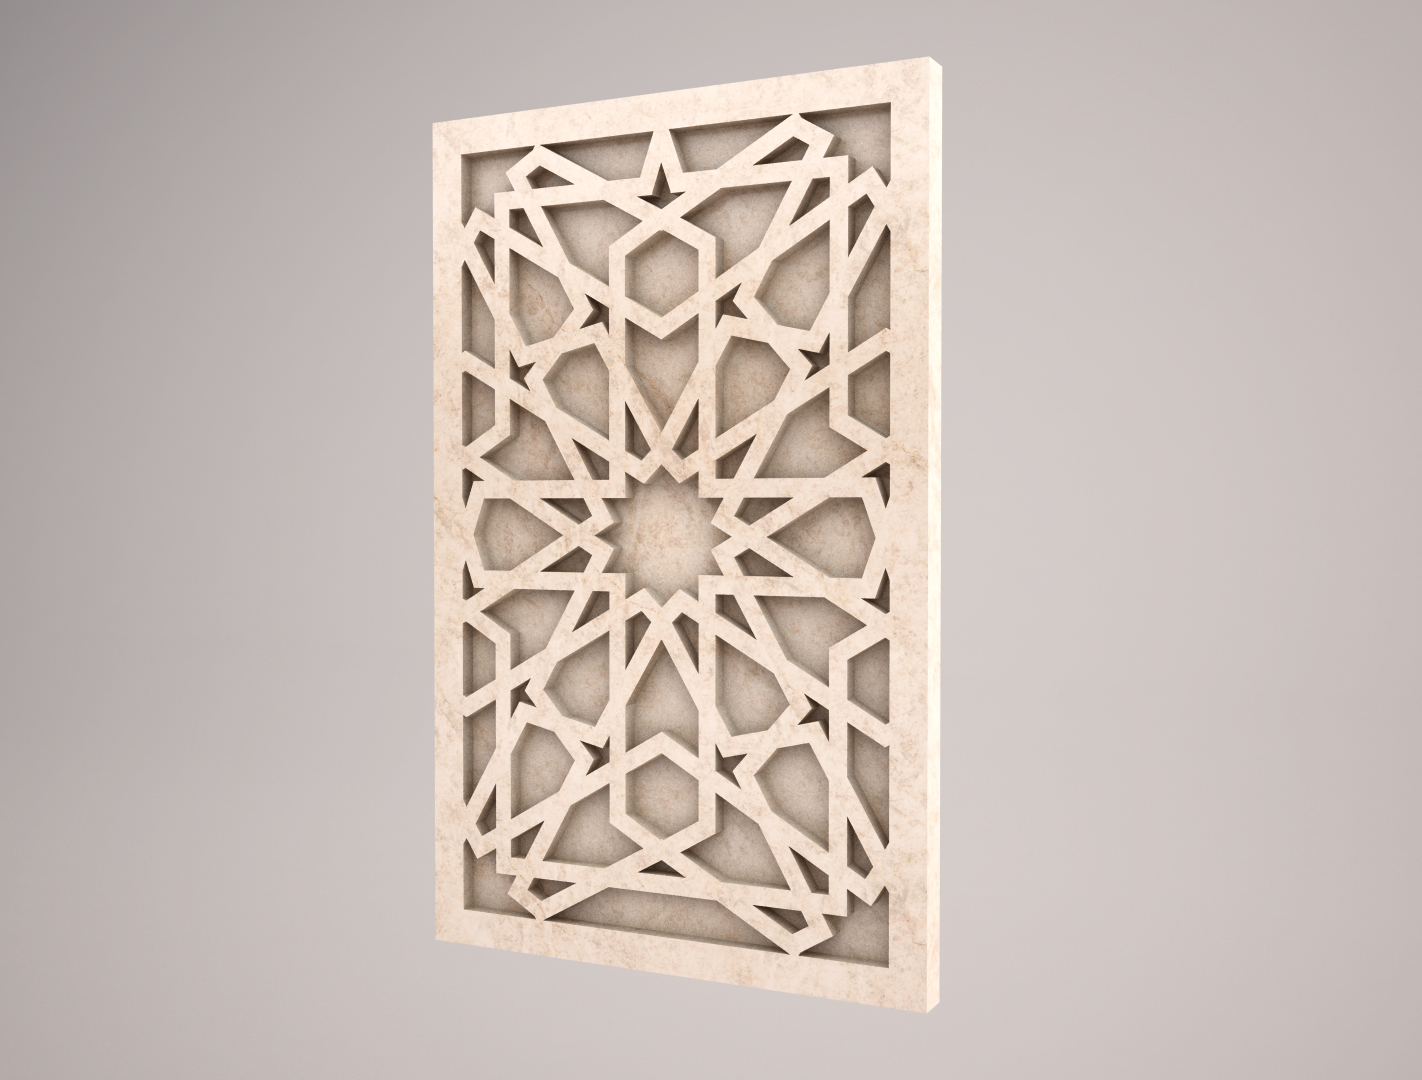 Islamic pattern B - CAD Files, DWG files, Plans and Details